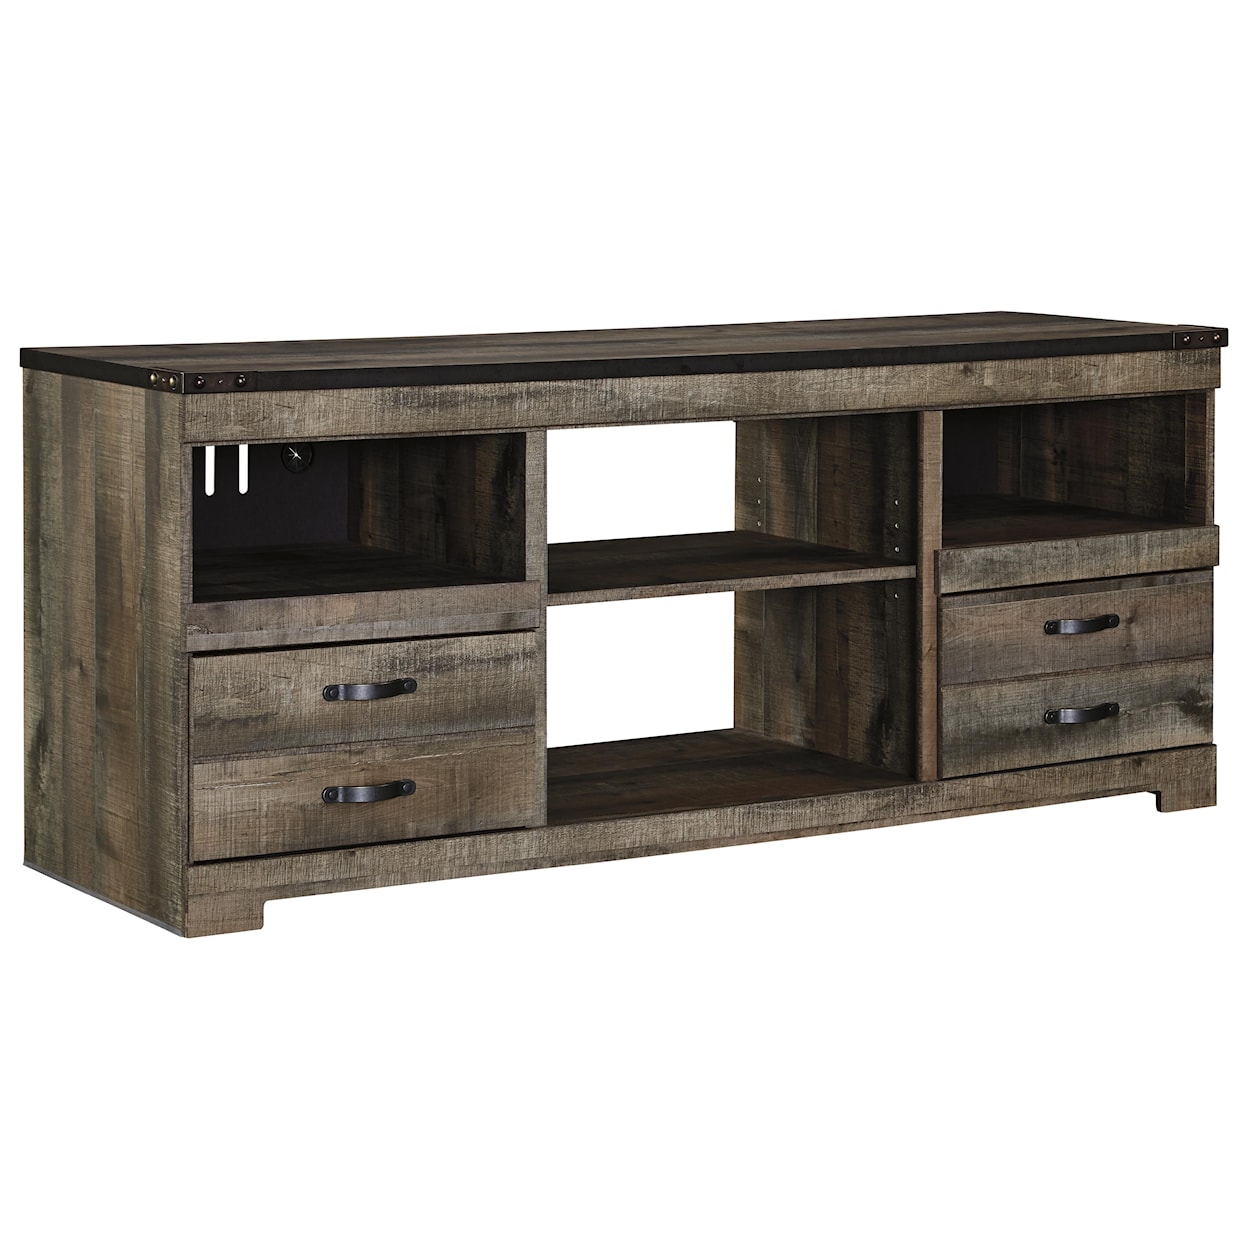 Benchcraft Trinell Large TV Stand